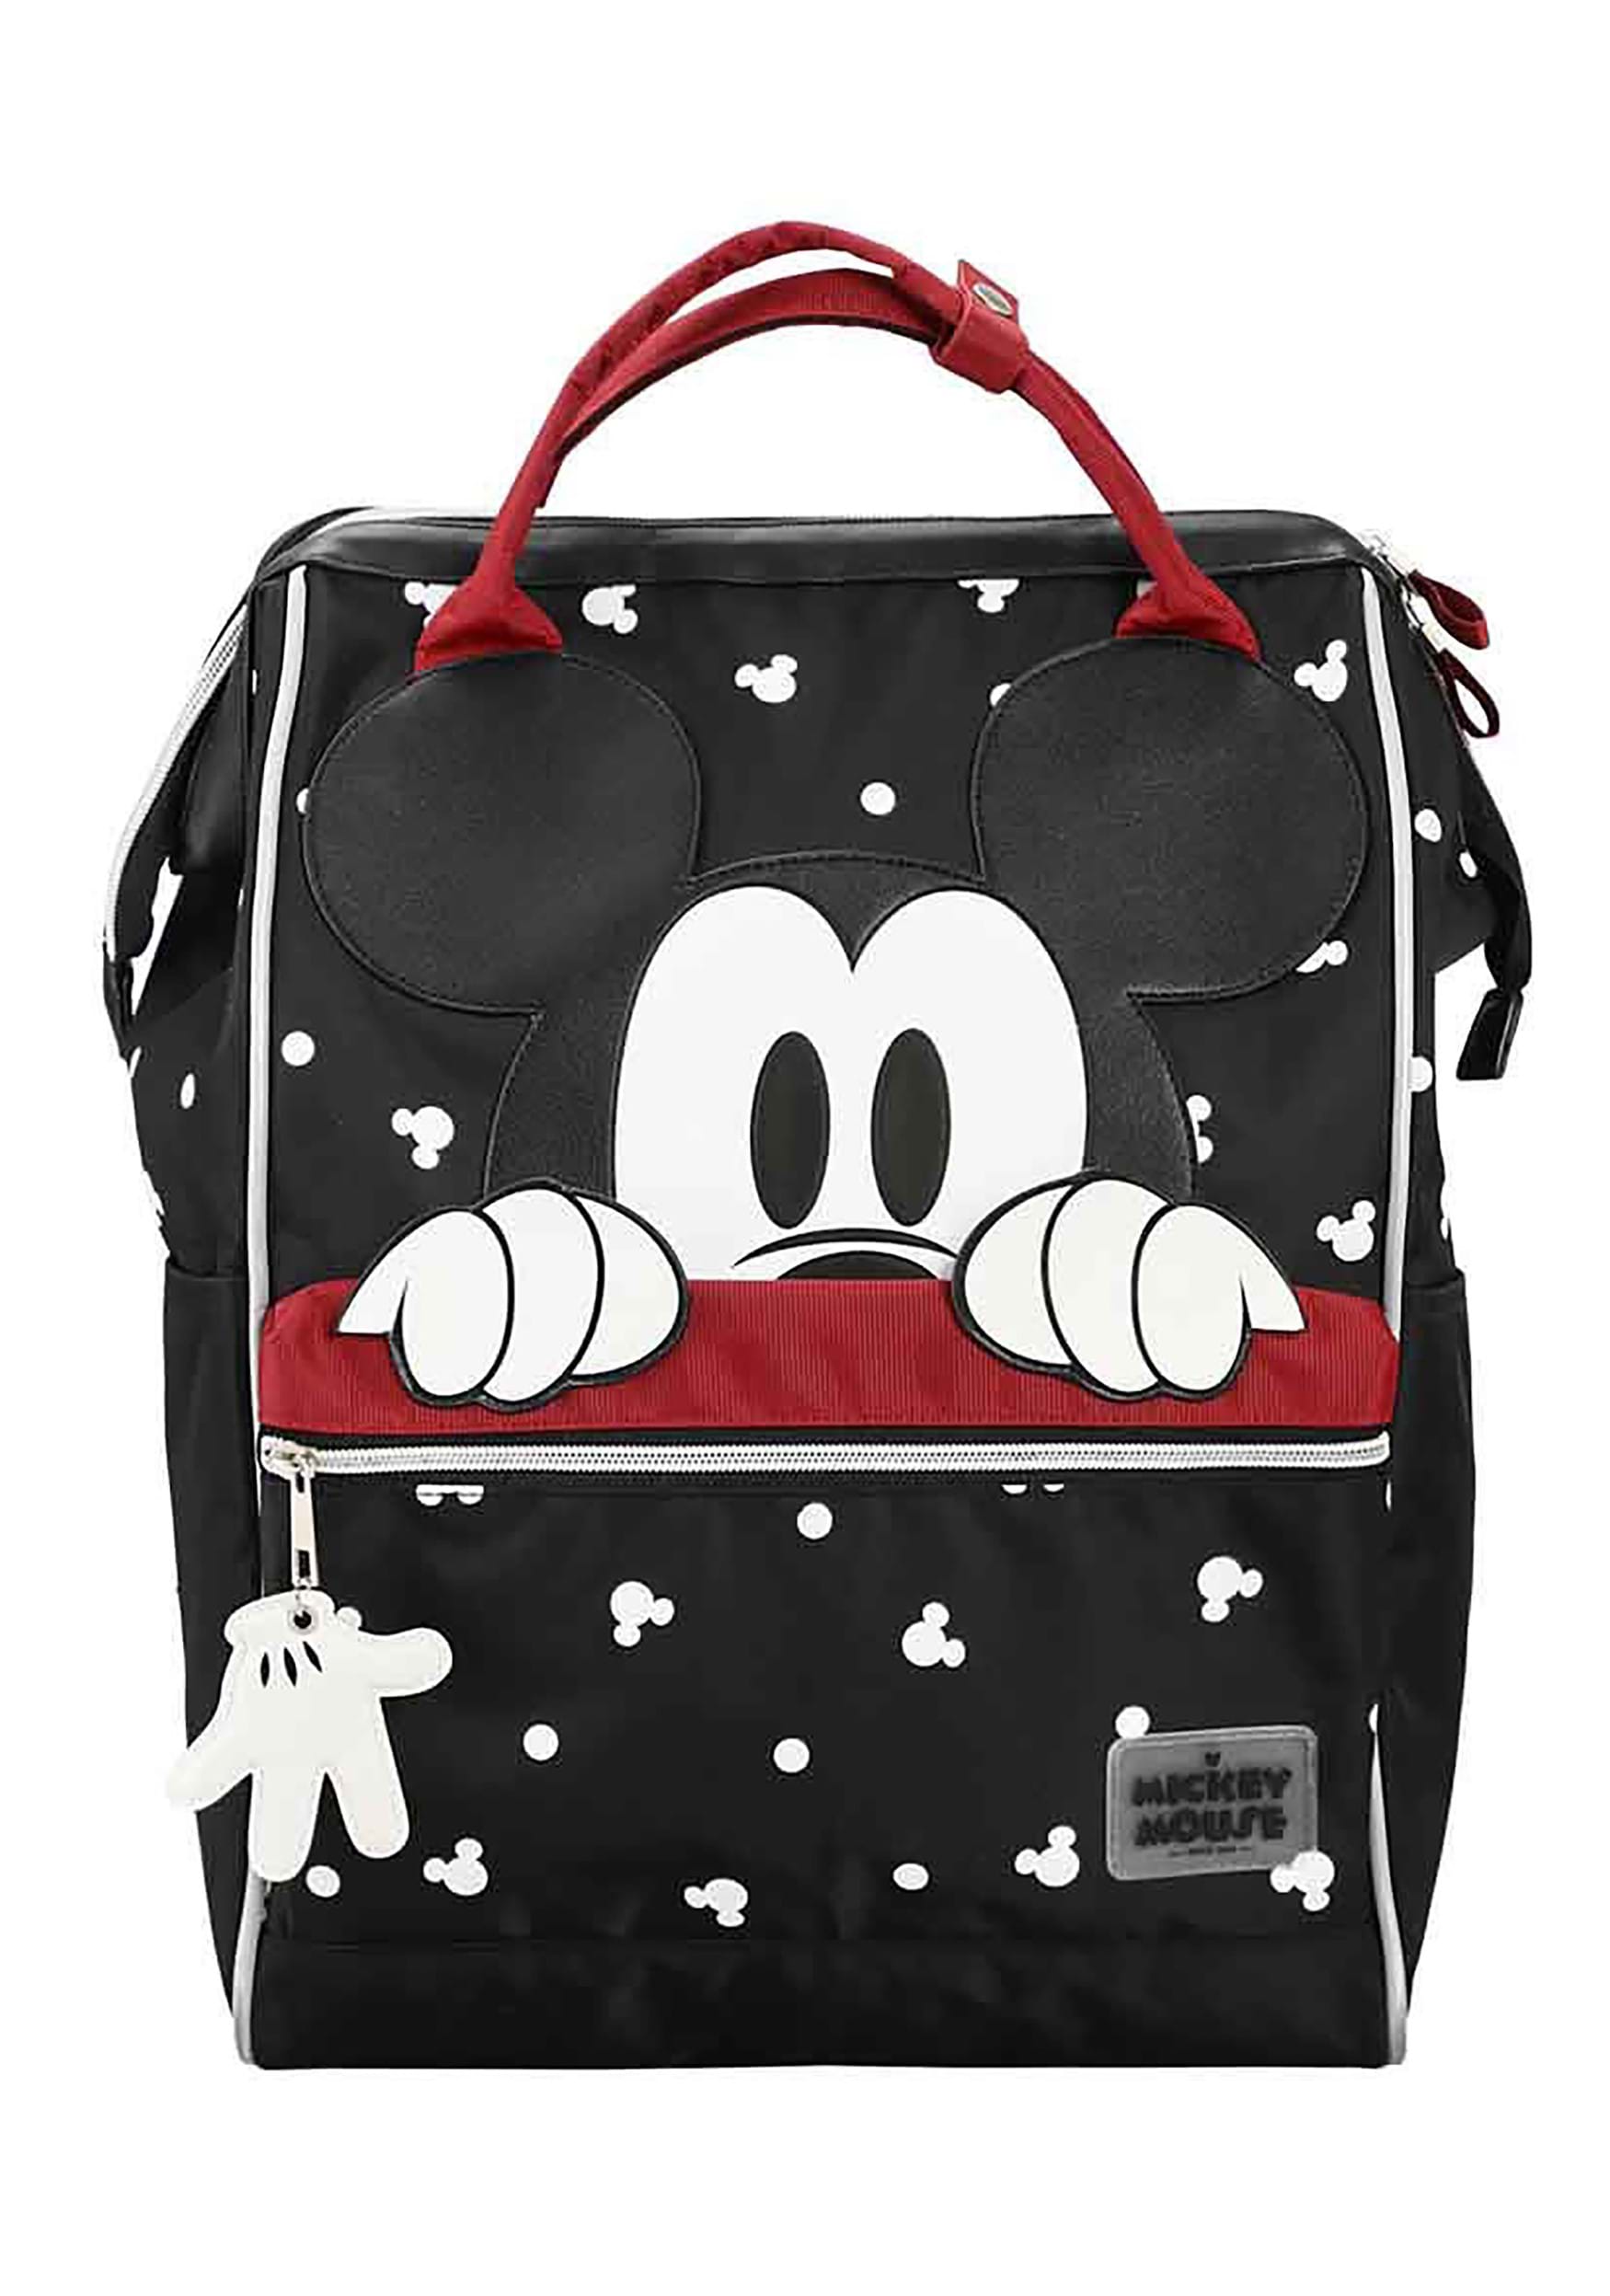 Japan Exclusive - Mickey Mouse Rattan Bag — USShoppingSOS